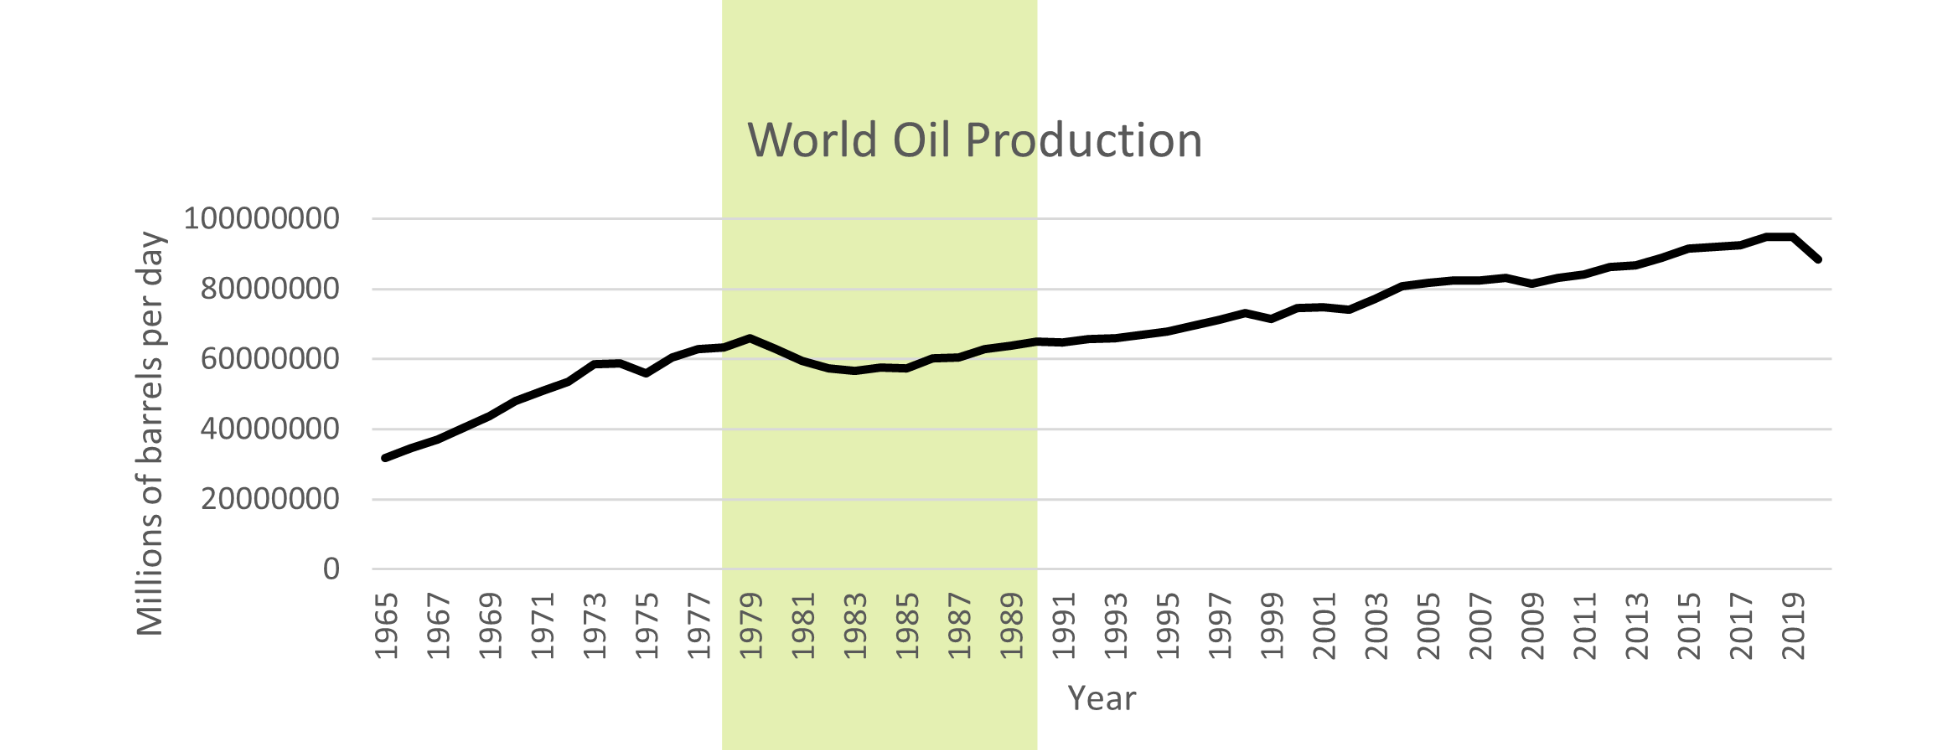 World Oil Production